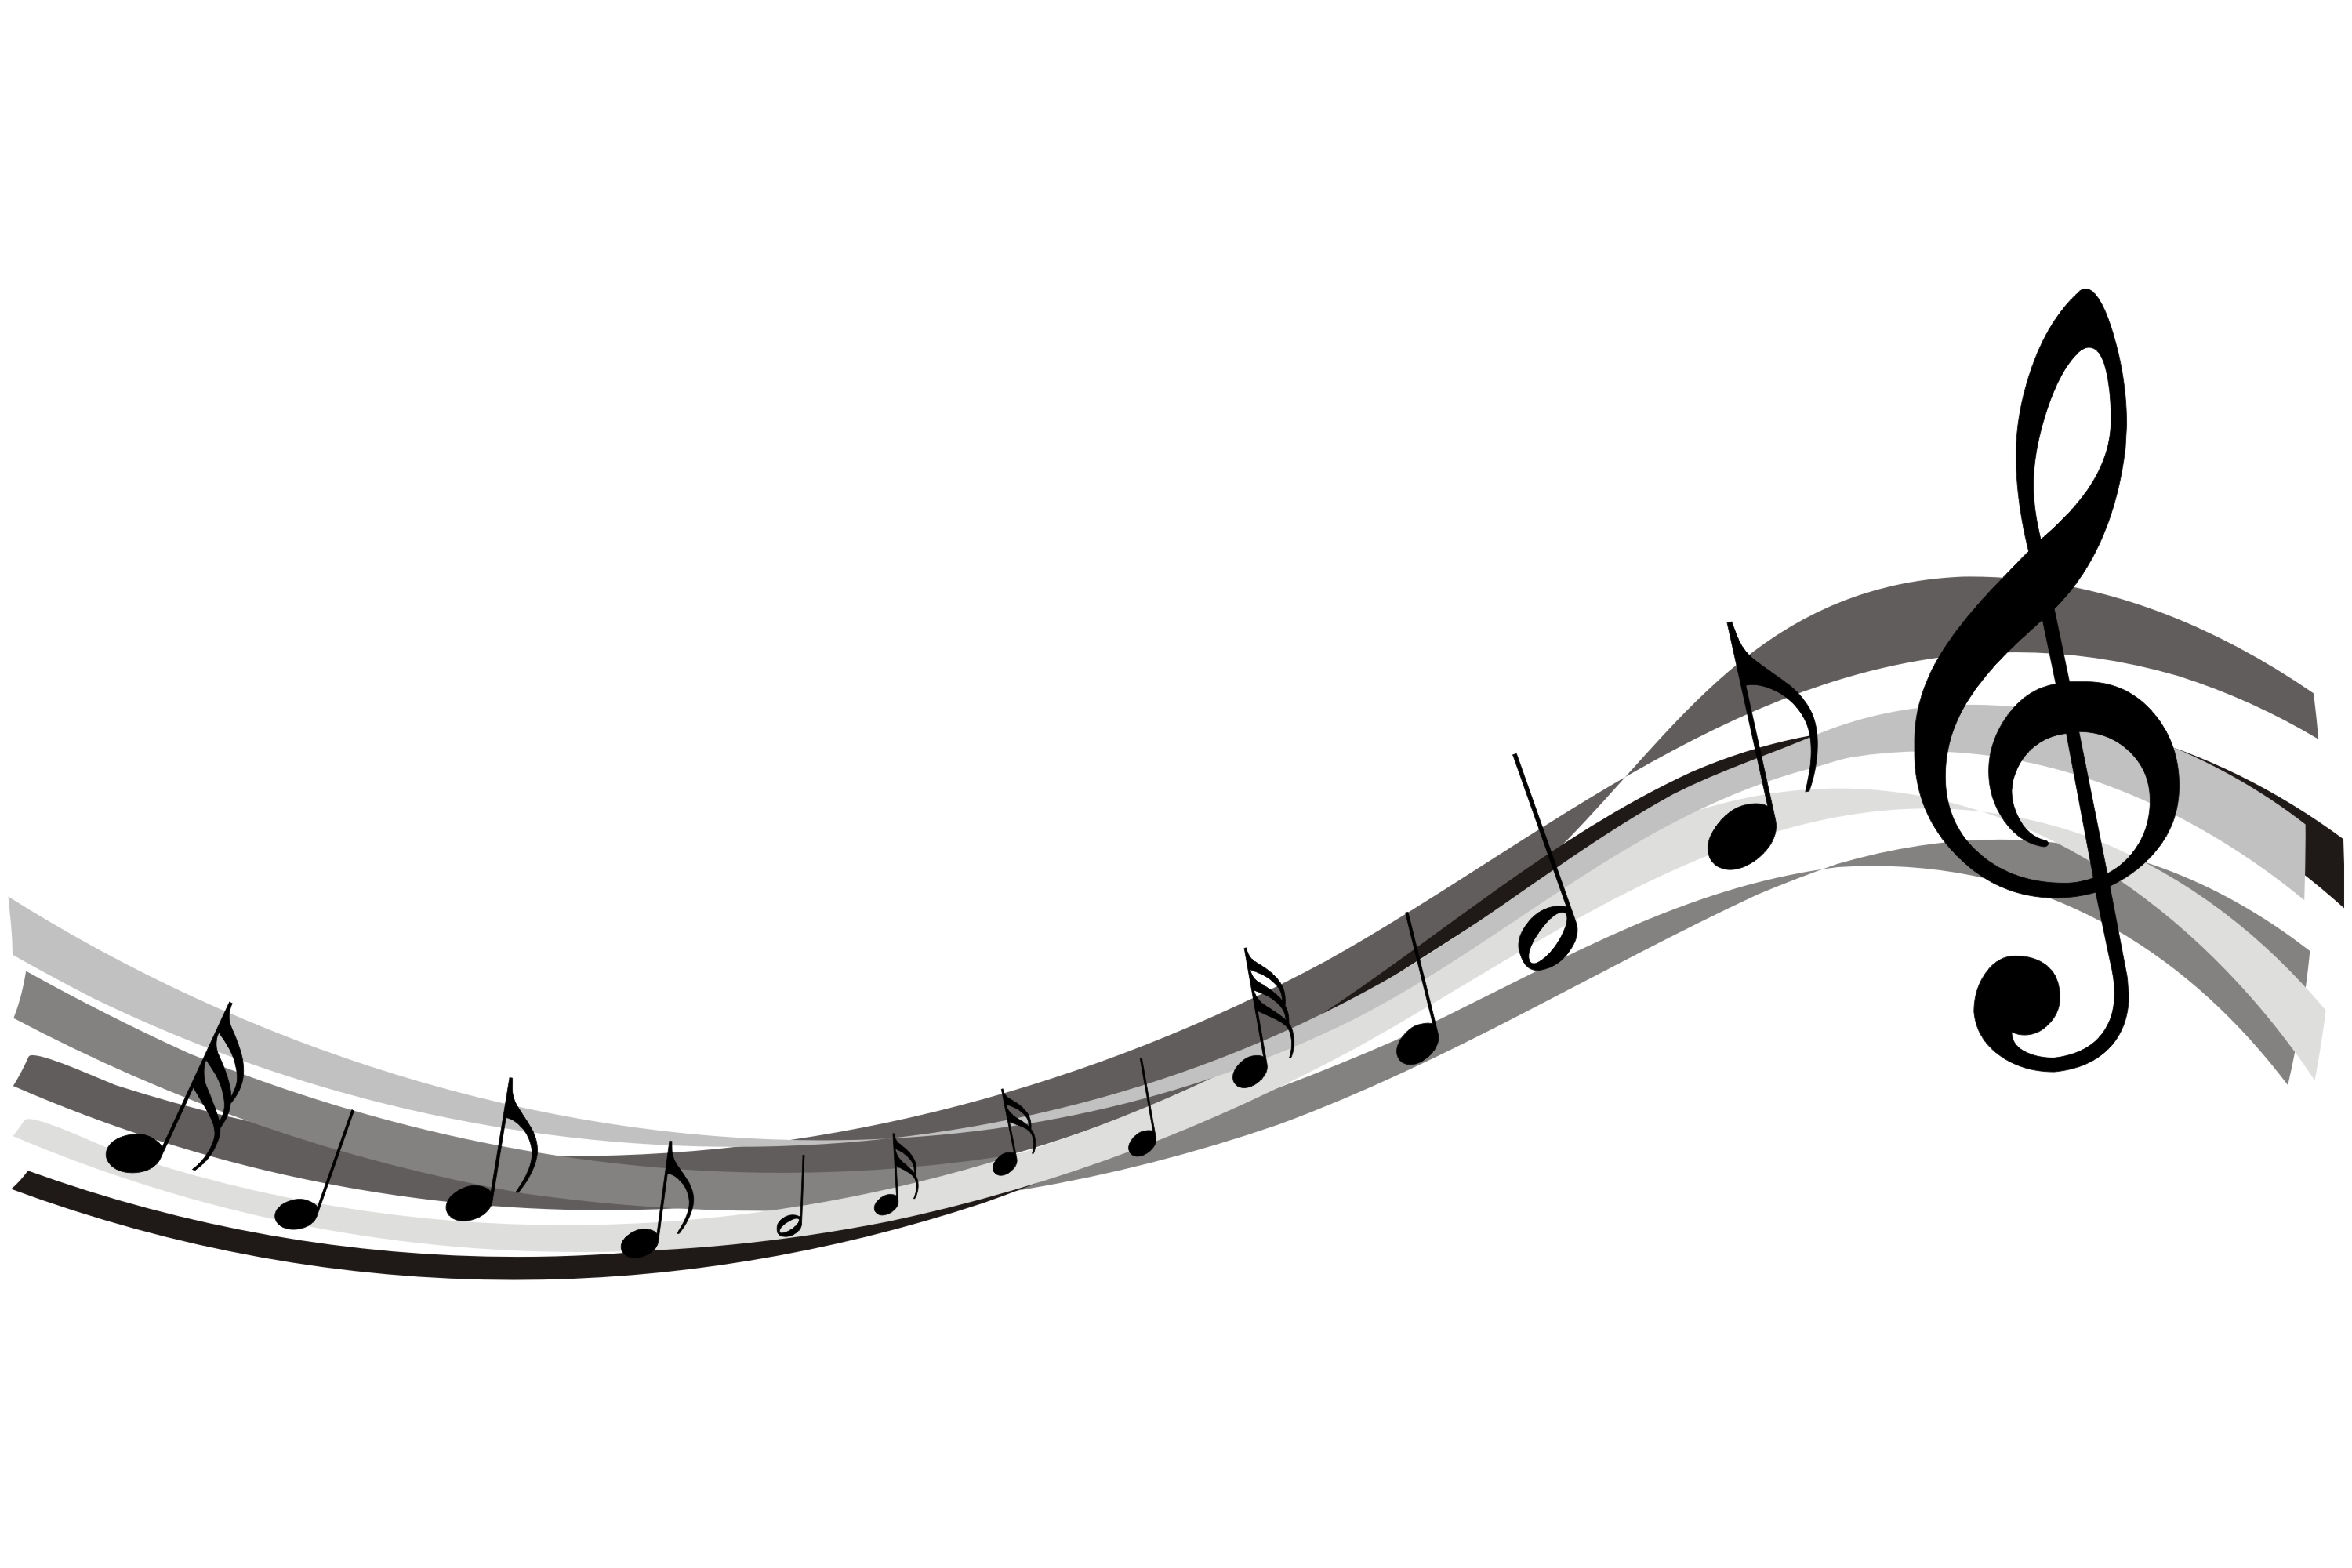 Musicnote | Free Images at Clker.com - vector clip art ...